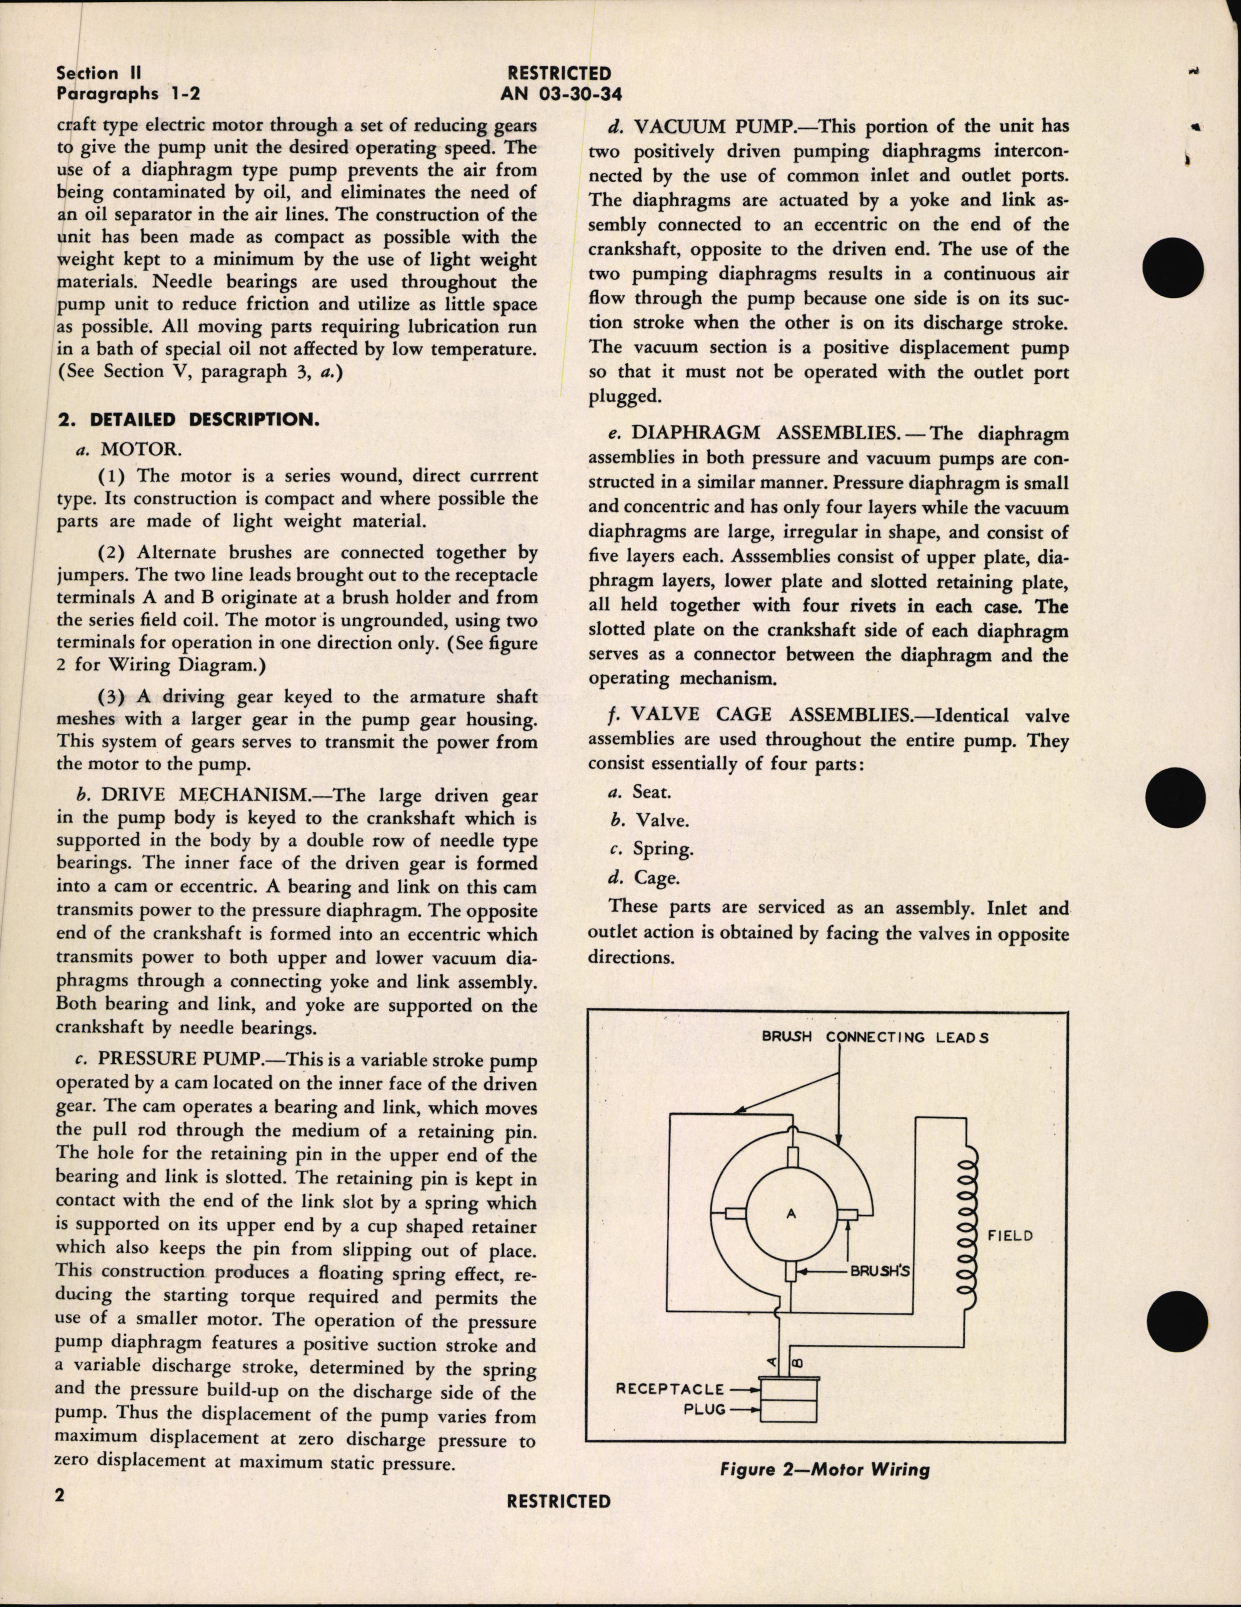 Sample page 6 from AirCorps Library document: Handbook of Instructions with Parts Catalog for Combination Pressure and vacuum Pump